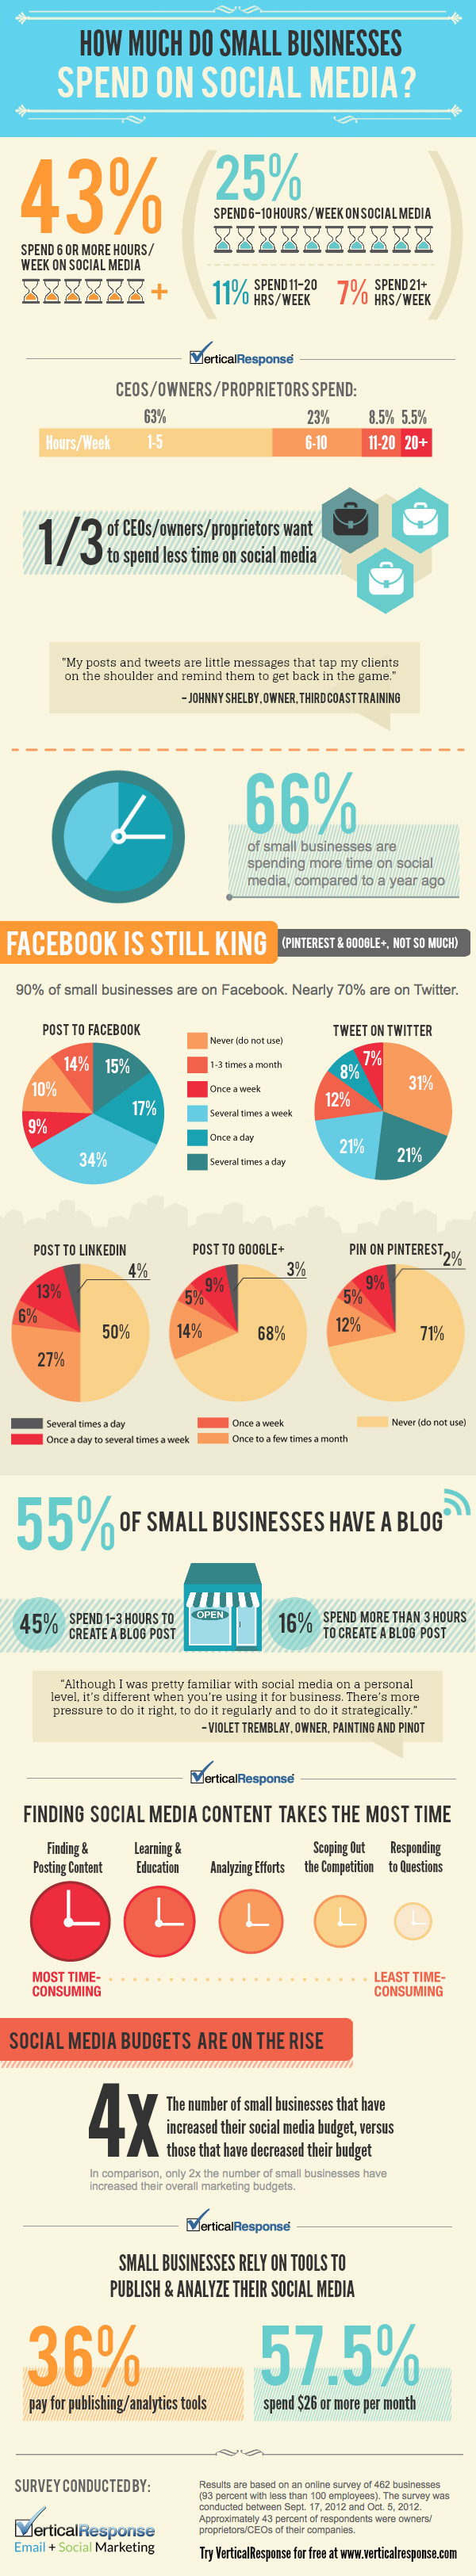 how_much_do_small_businesses_spend_on_social_media.png